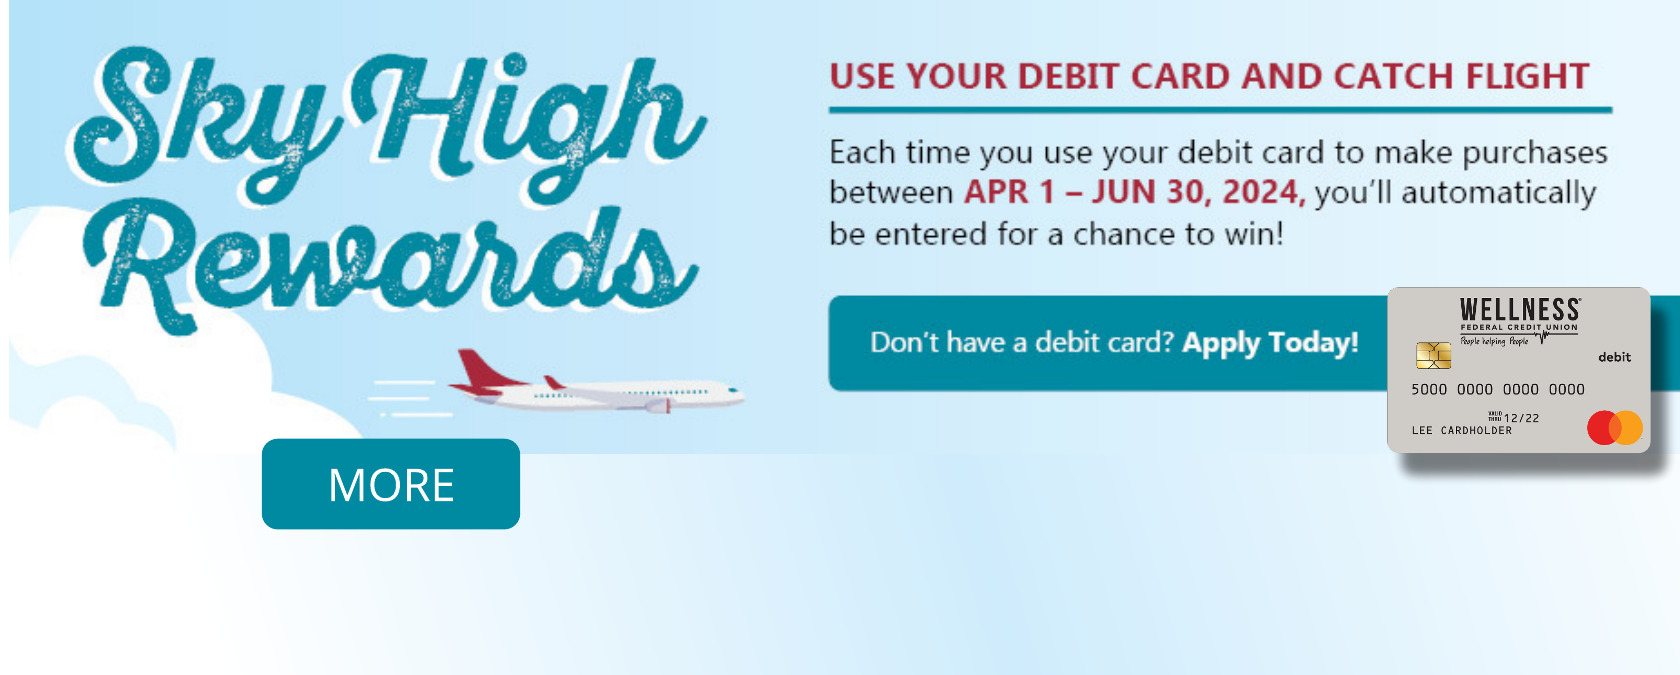 Sky High Rewards. Use your debit card and catch flight. Each time you use your debit card to make purchases between April 1 - June 30, 2024, you'll automatically be entered for a chance to win! Apply Today!